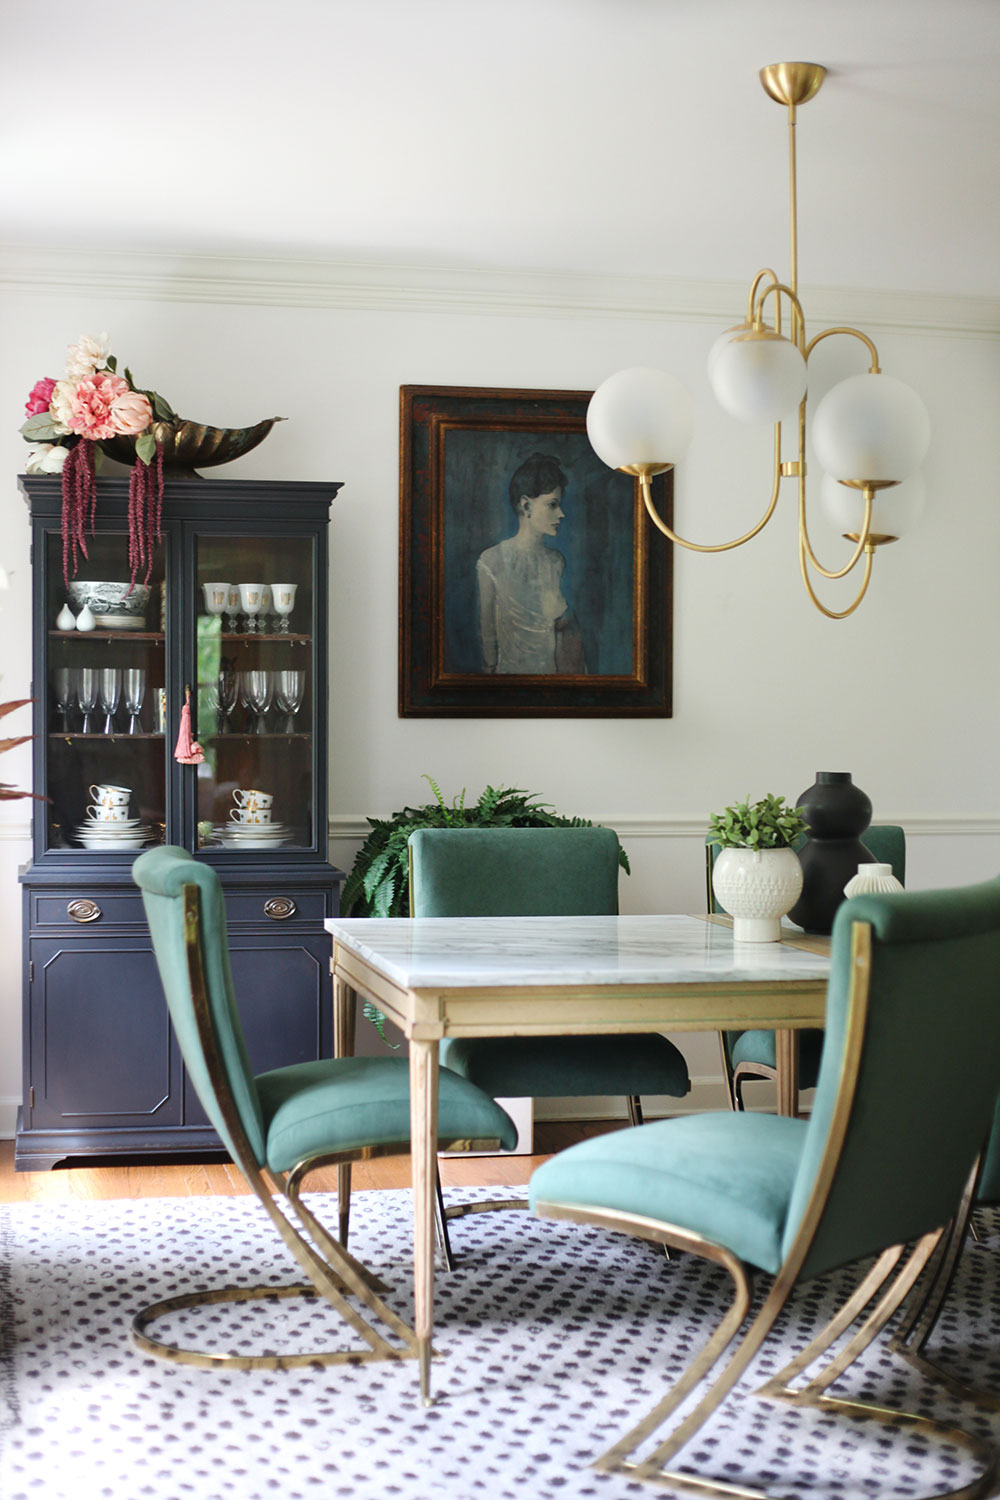 Reupholstered dining chairs in green and brass cantilever chairs by Pierre Cardin in eclectic modern dining room. Modern chandelier and 1950s French marble pastry table used as dining table. Mixing vintage with new.